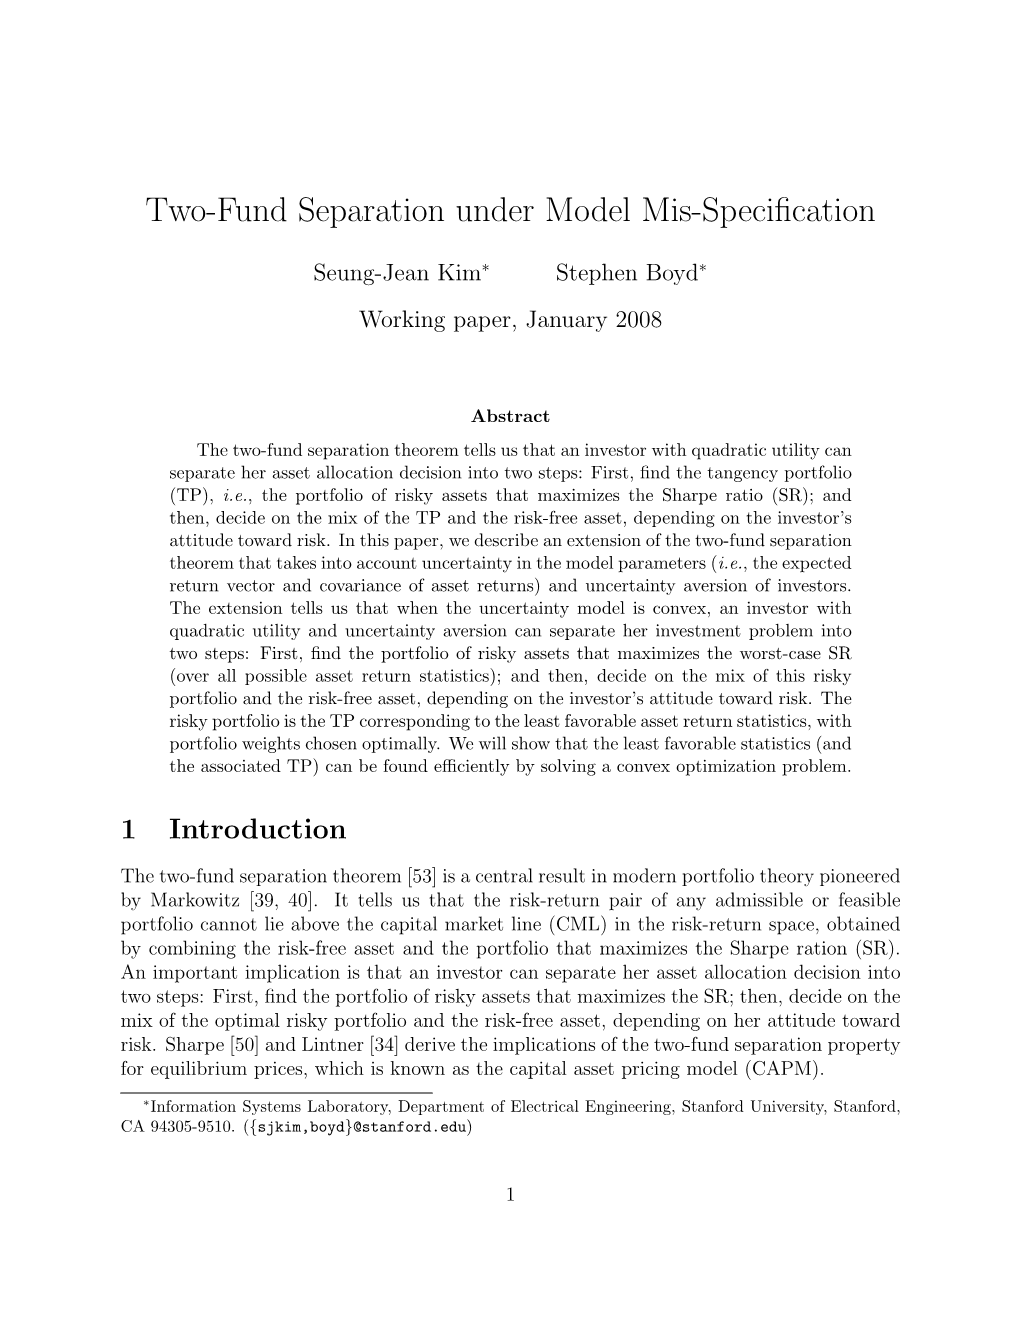 Two-Fund Separation Under Model Mis-Specification